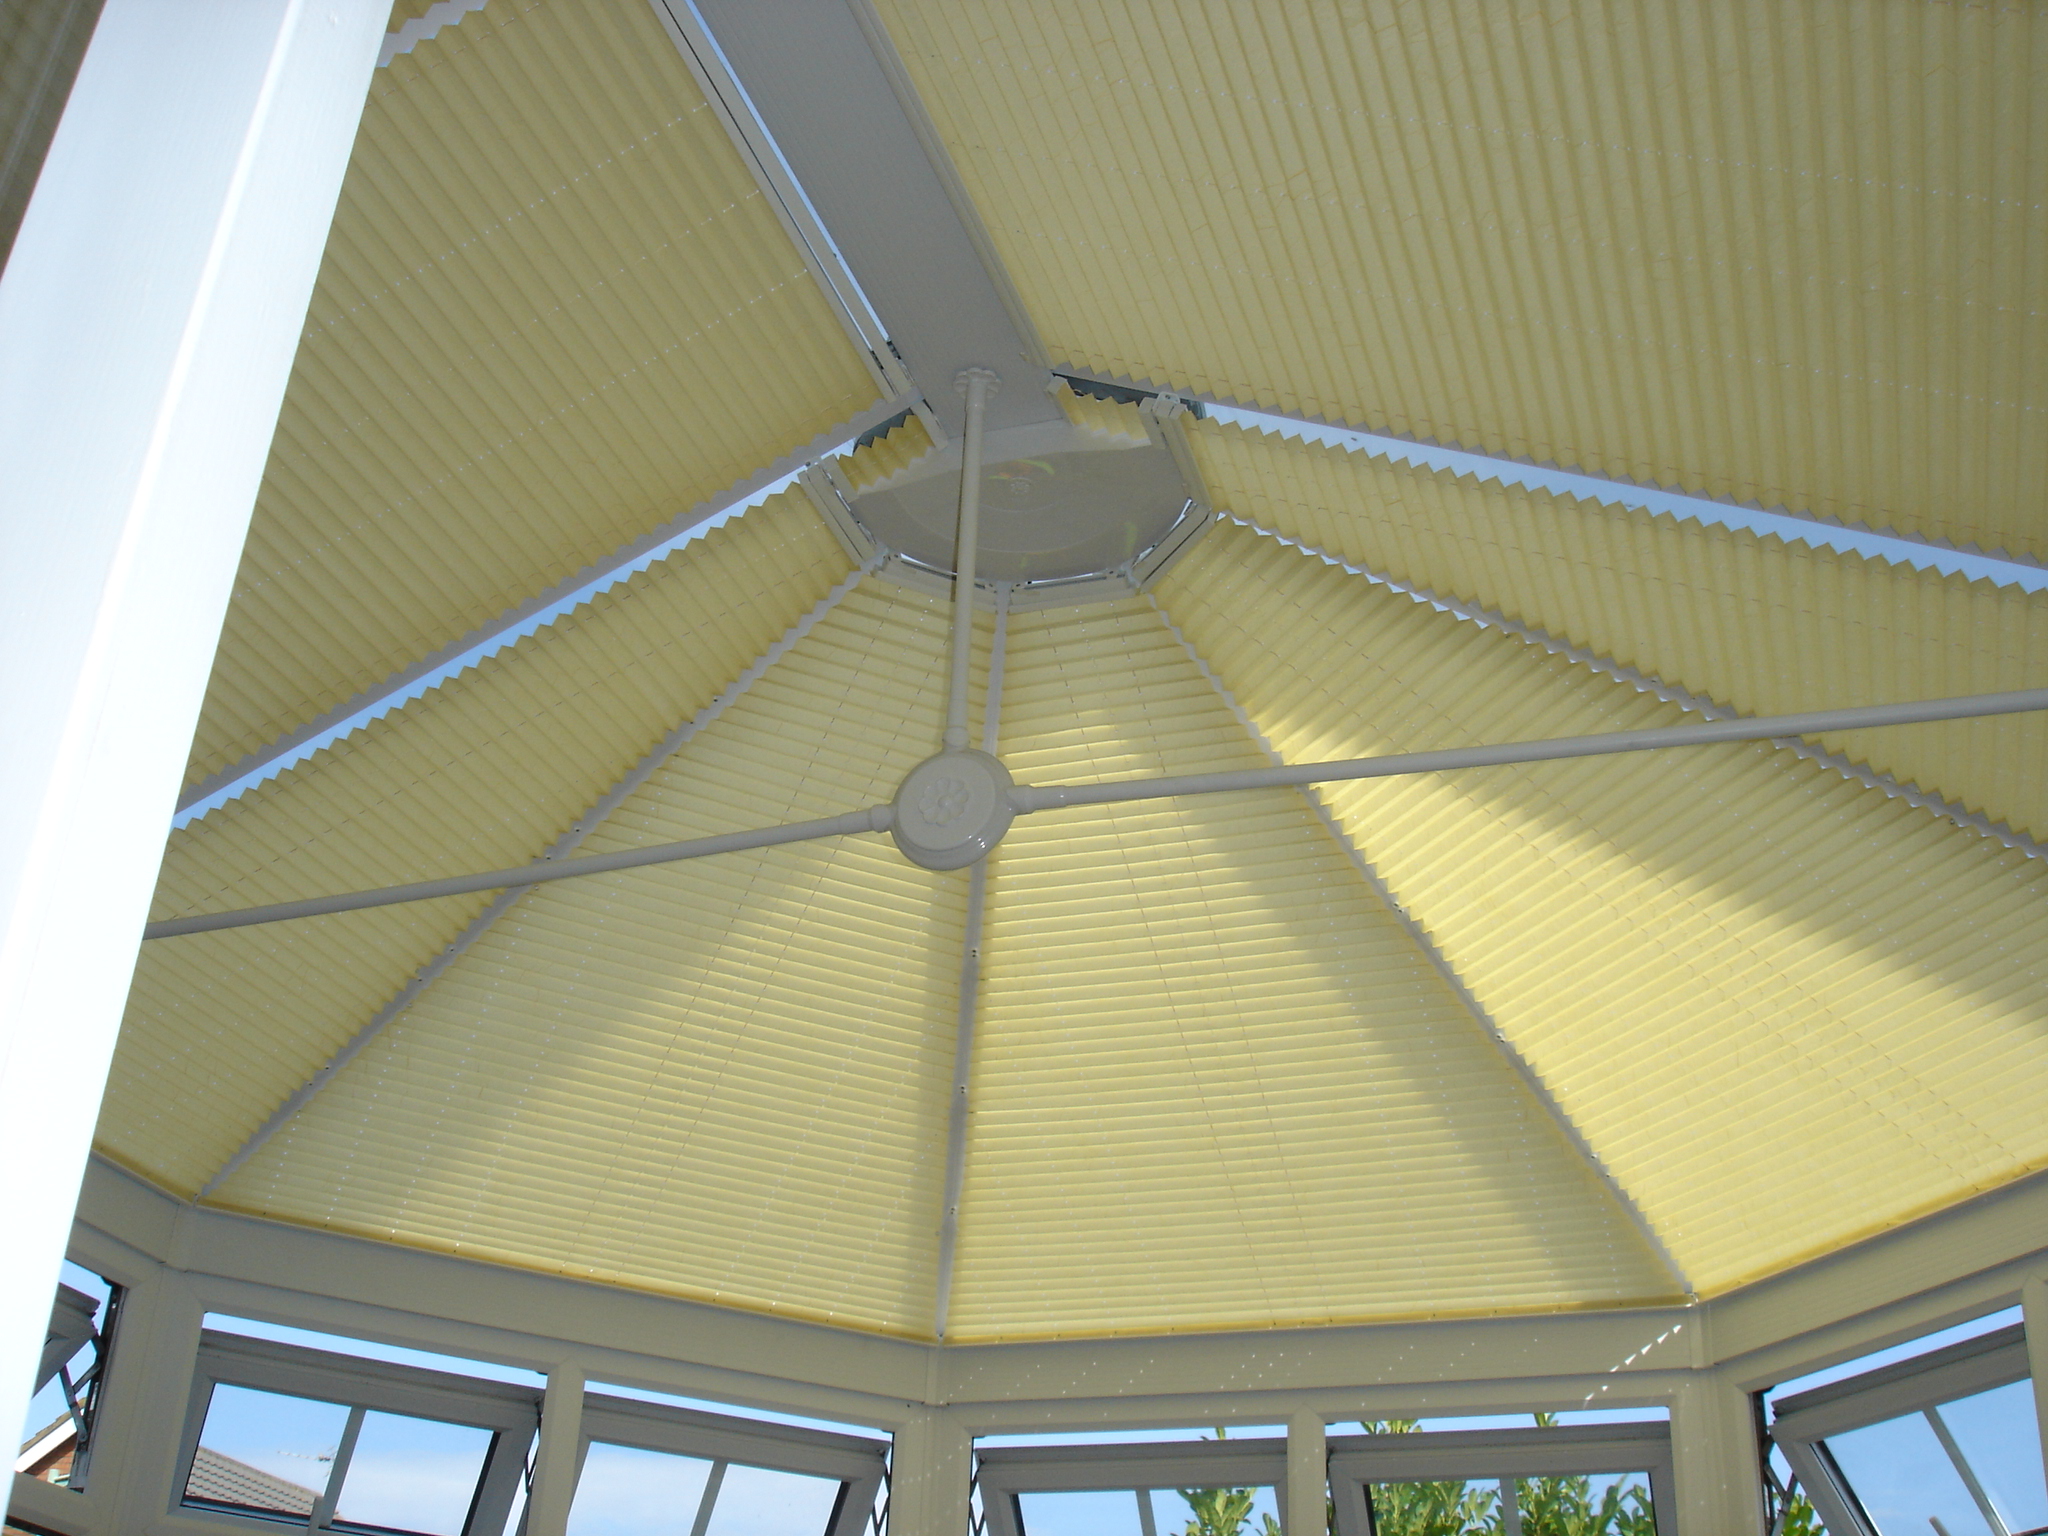 Conservatory roof blinds